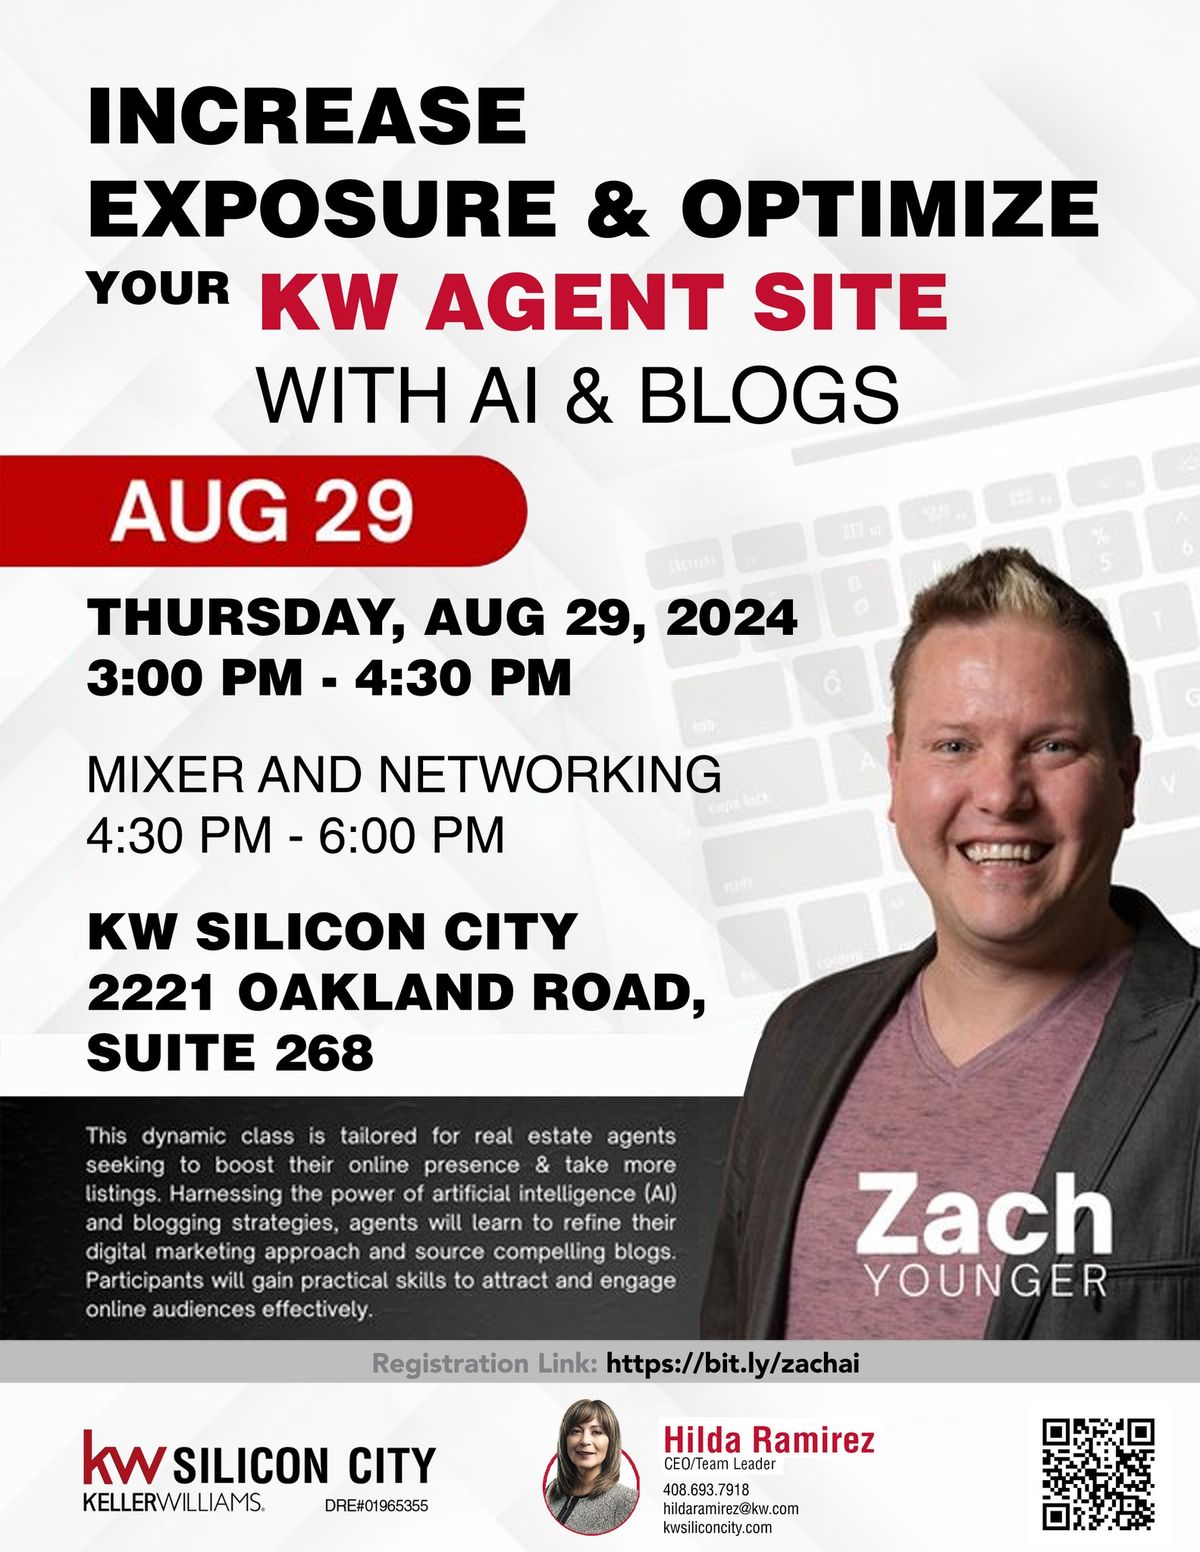 Zach Younger - Optimizing Your KW Website using A.I. & Blogs